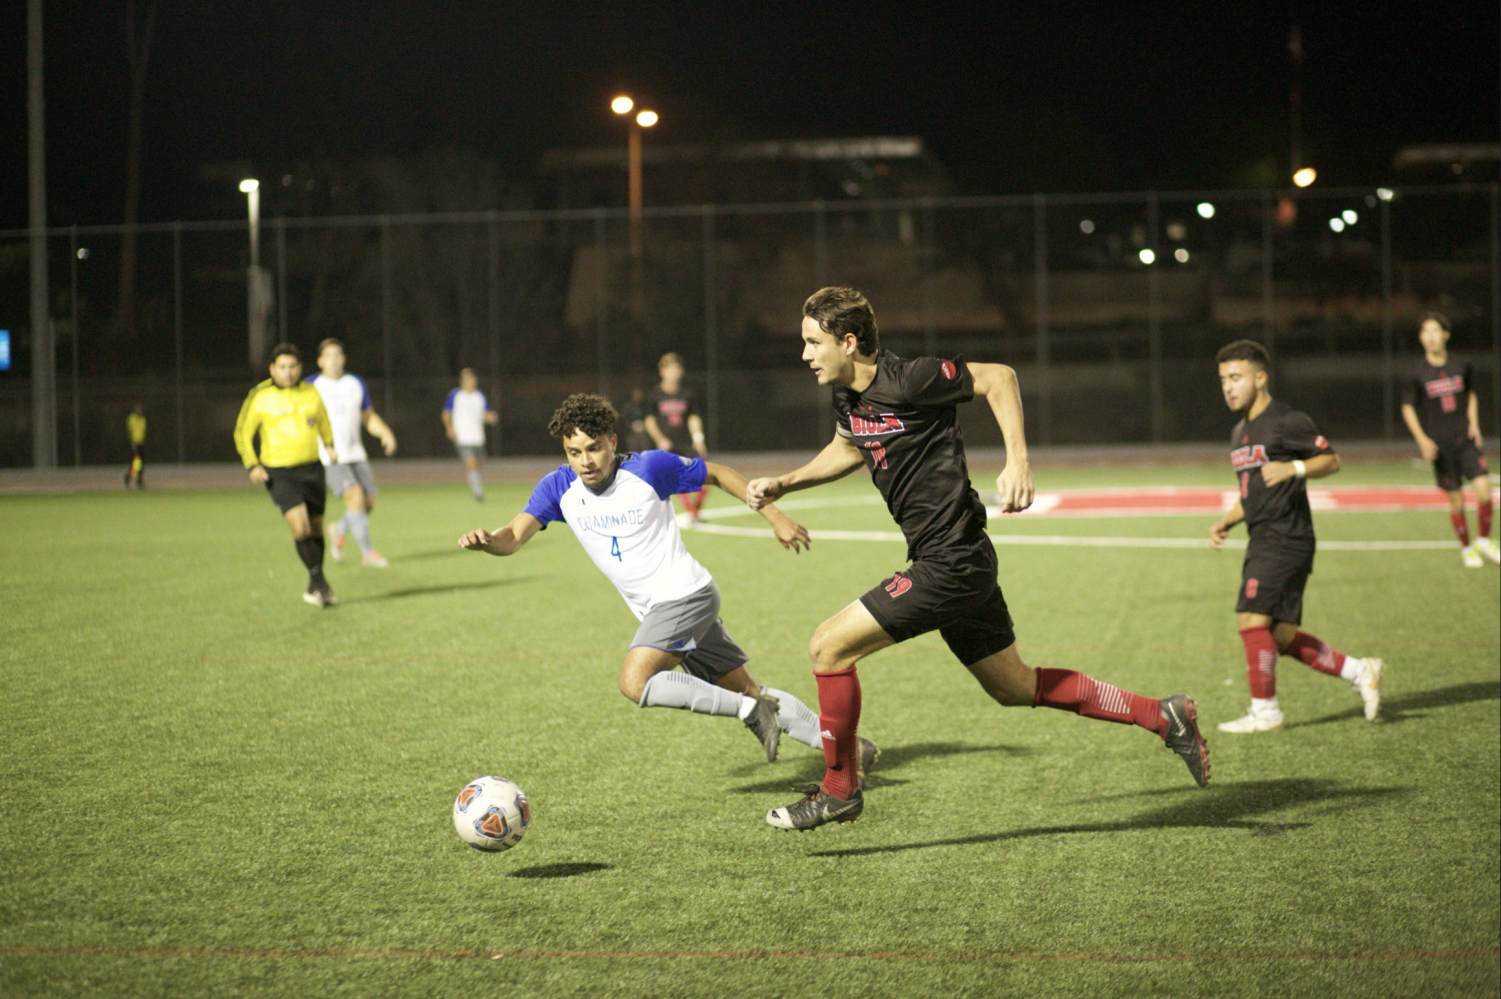 Senior defender Jake Munivez races to the ball against his opponent from Chaminade Hawaii University during their game on October 31, 2019. 